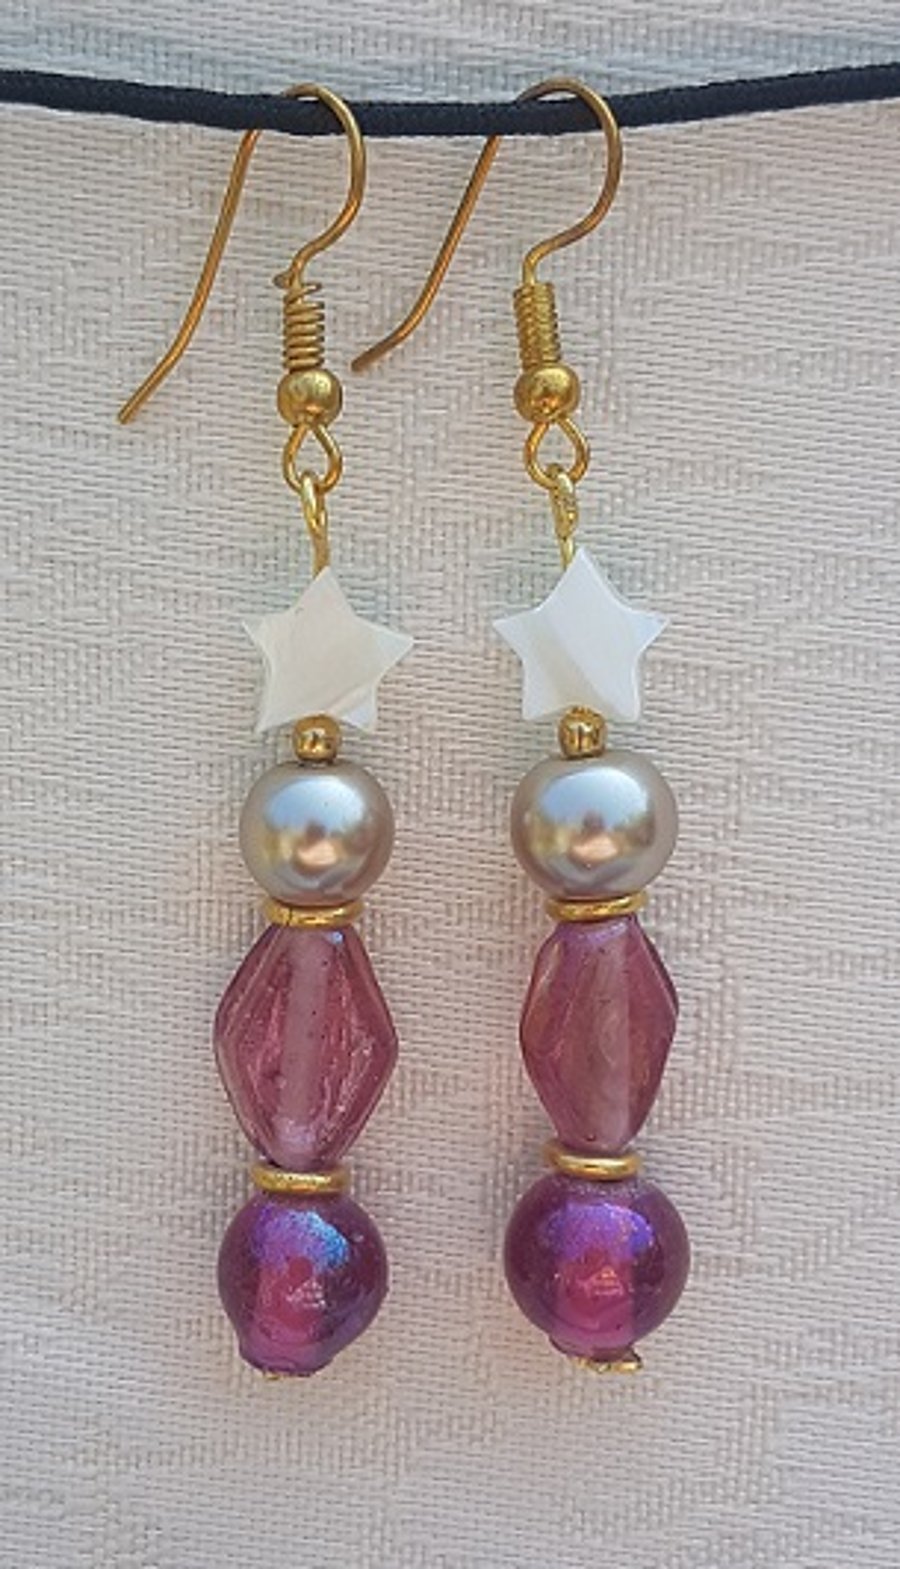 Lovely Pink glass and white stars Earrings